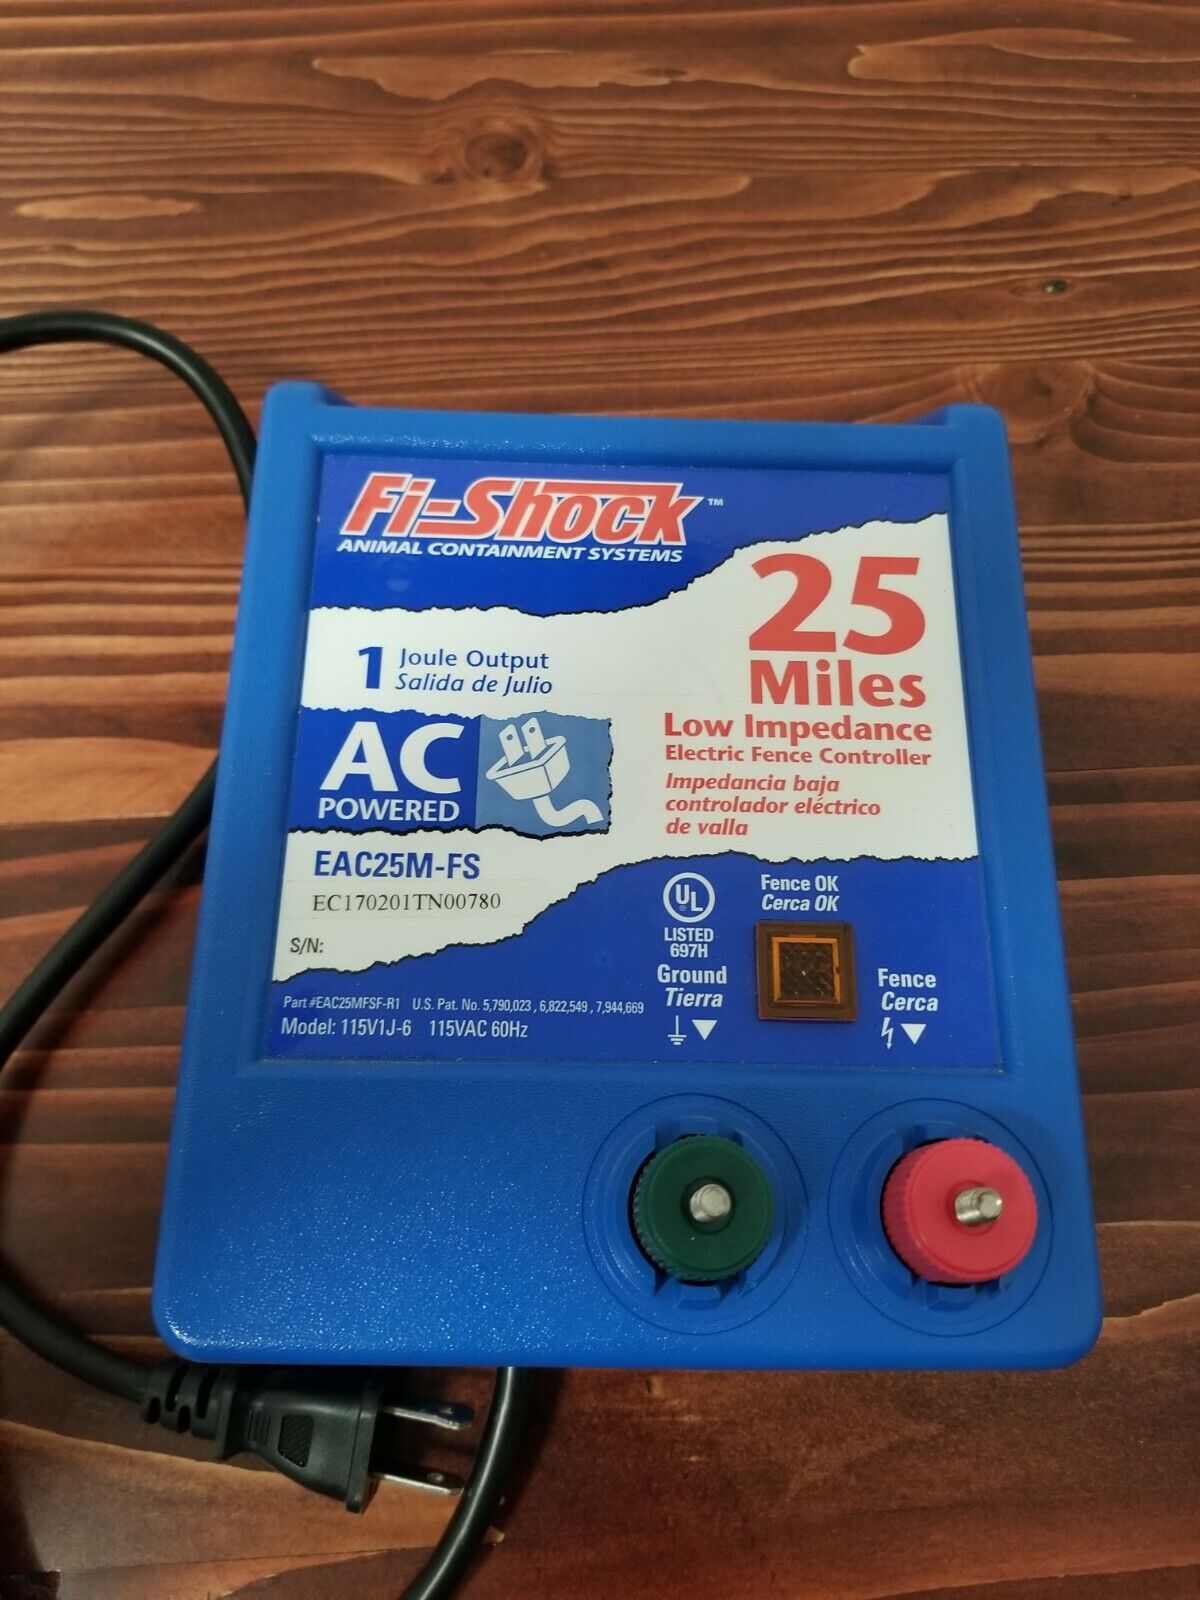 Fi-Shock 25 mile Fence Charger EAC25M-FS Fuseless Low Impedance AC Powered...